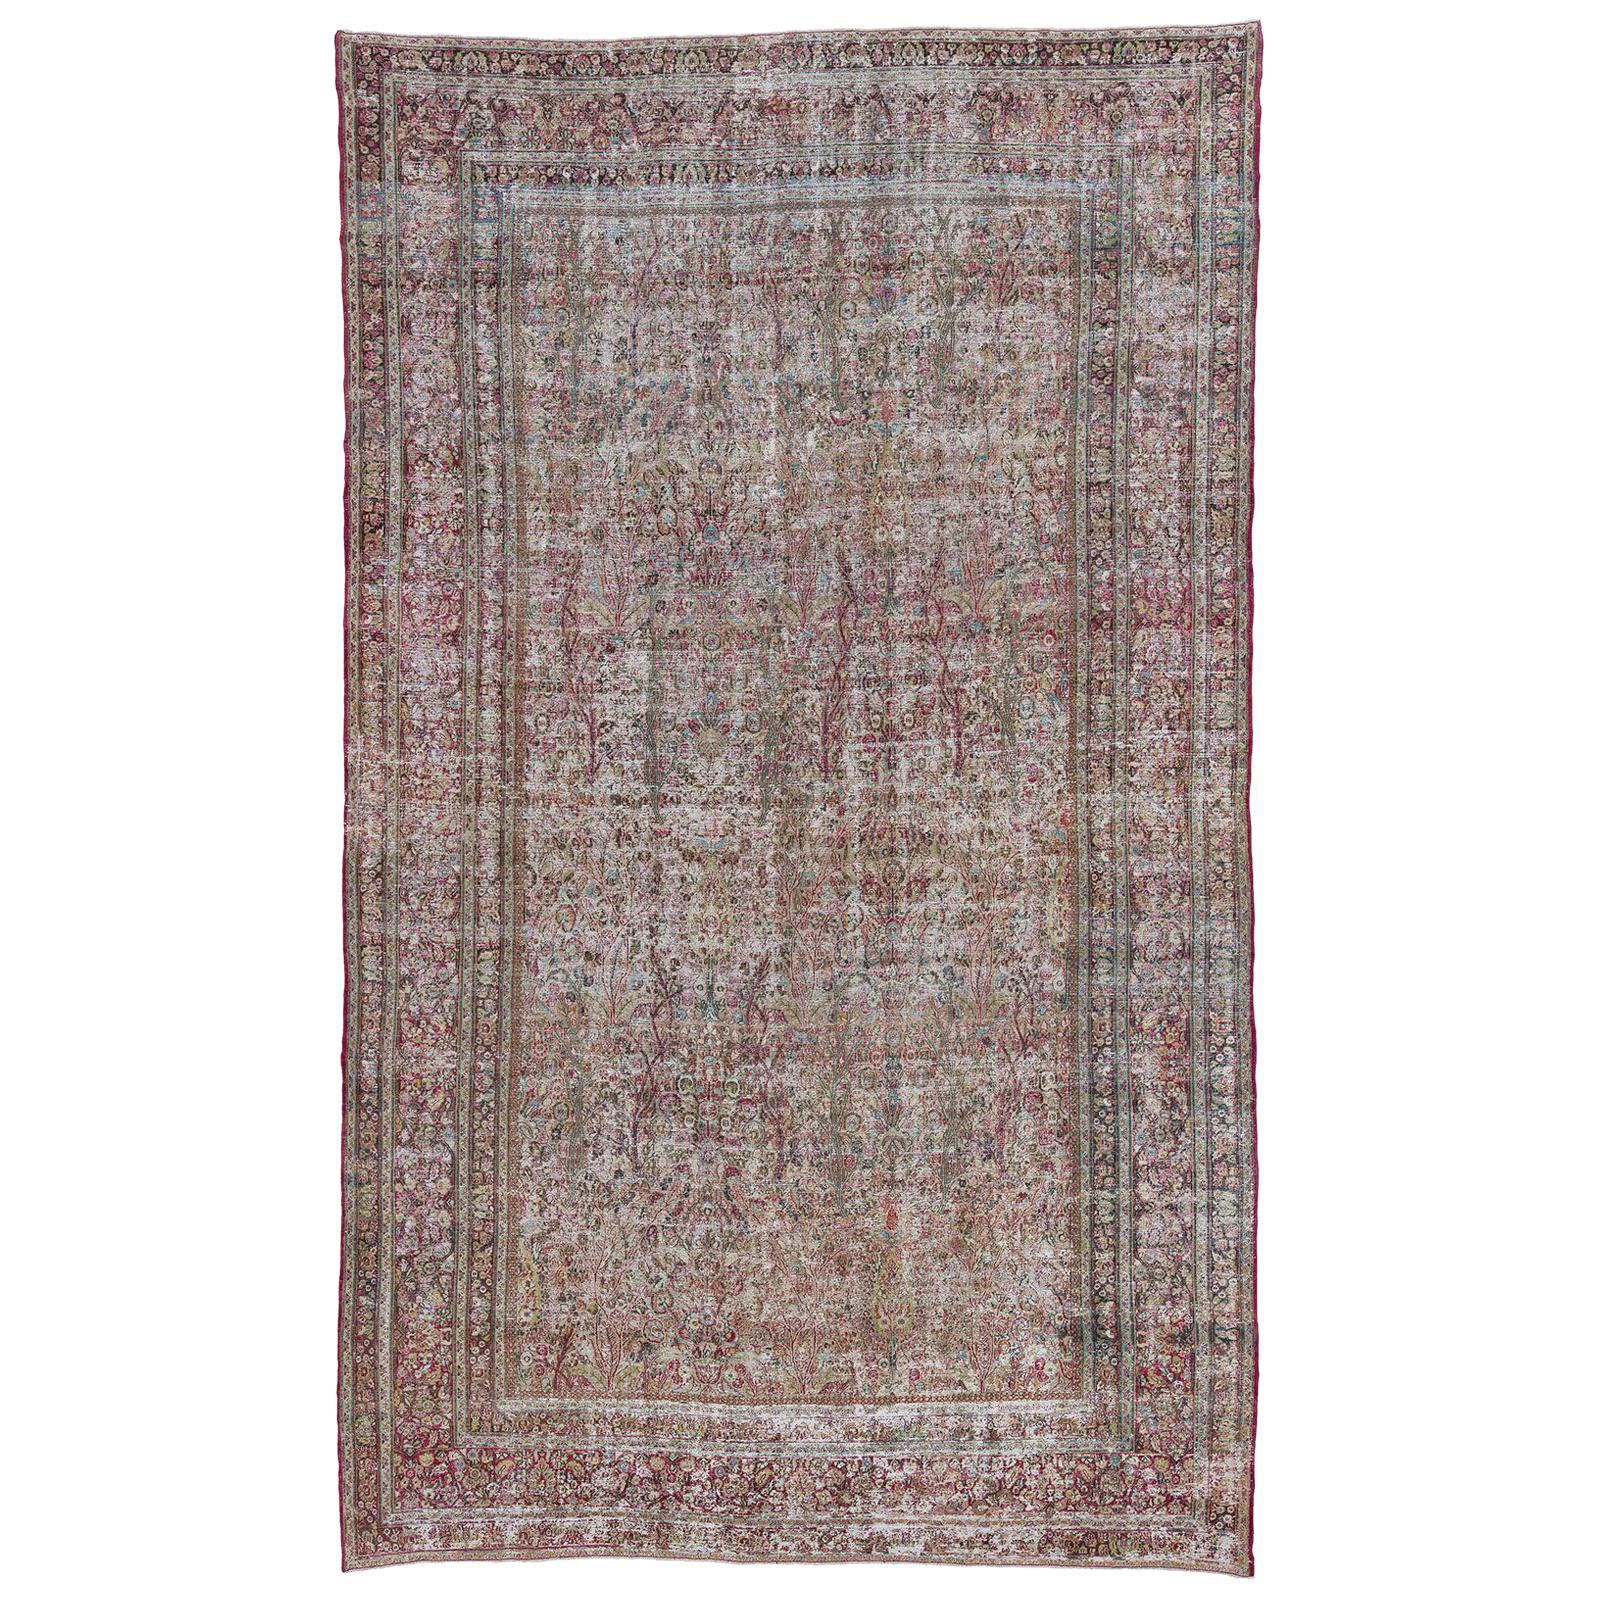 Shabby Chic Distressed Persian Oversize Carpet For Sale